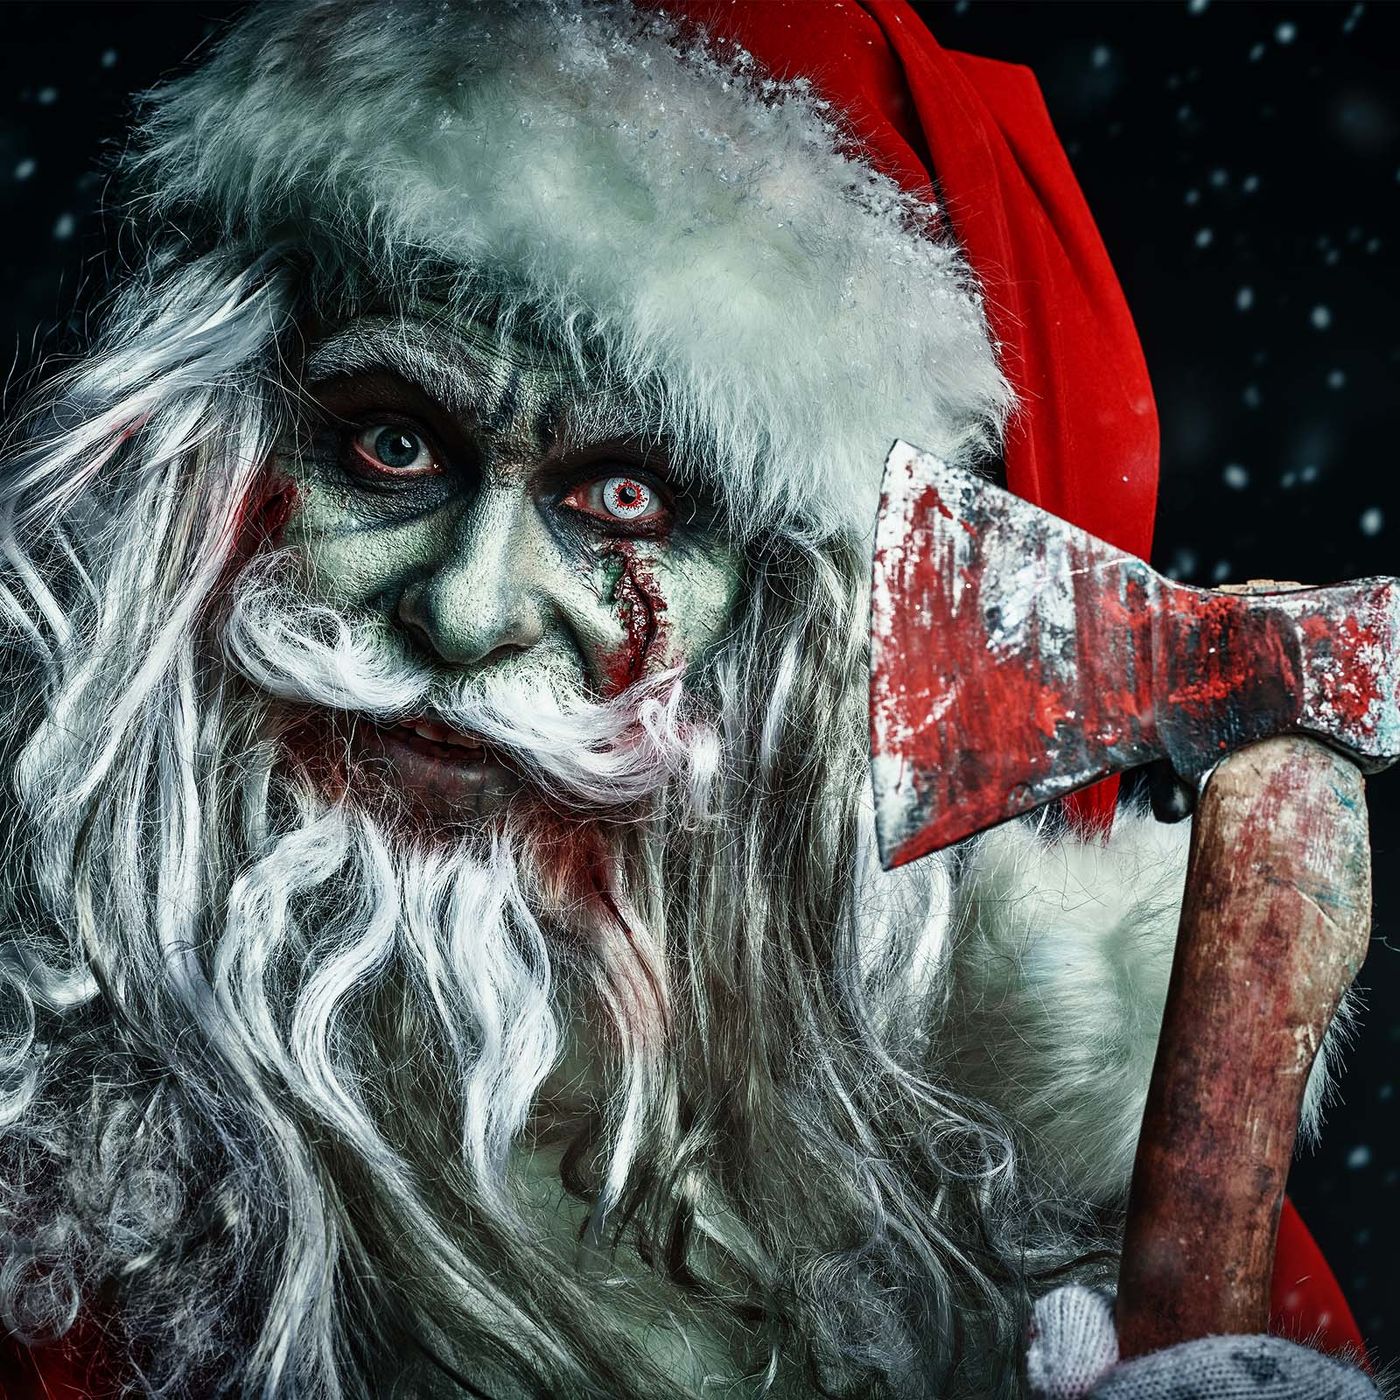 Ep.167 – Santa Claus is Killin' the Town - The Slay Bells are Ringing! Image